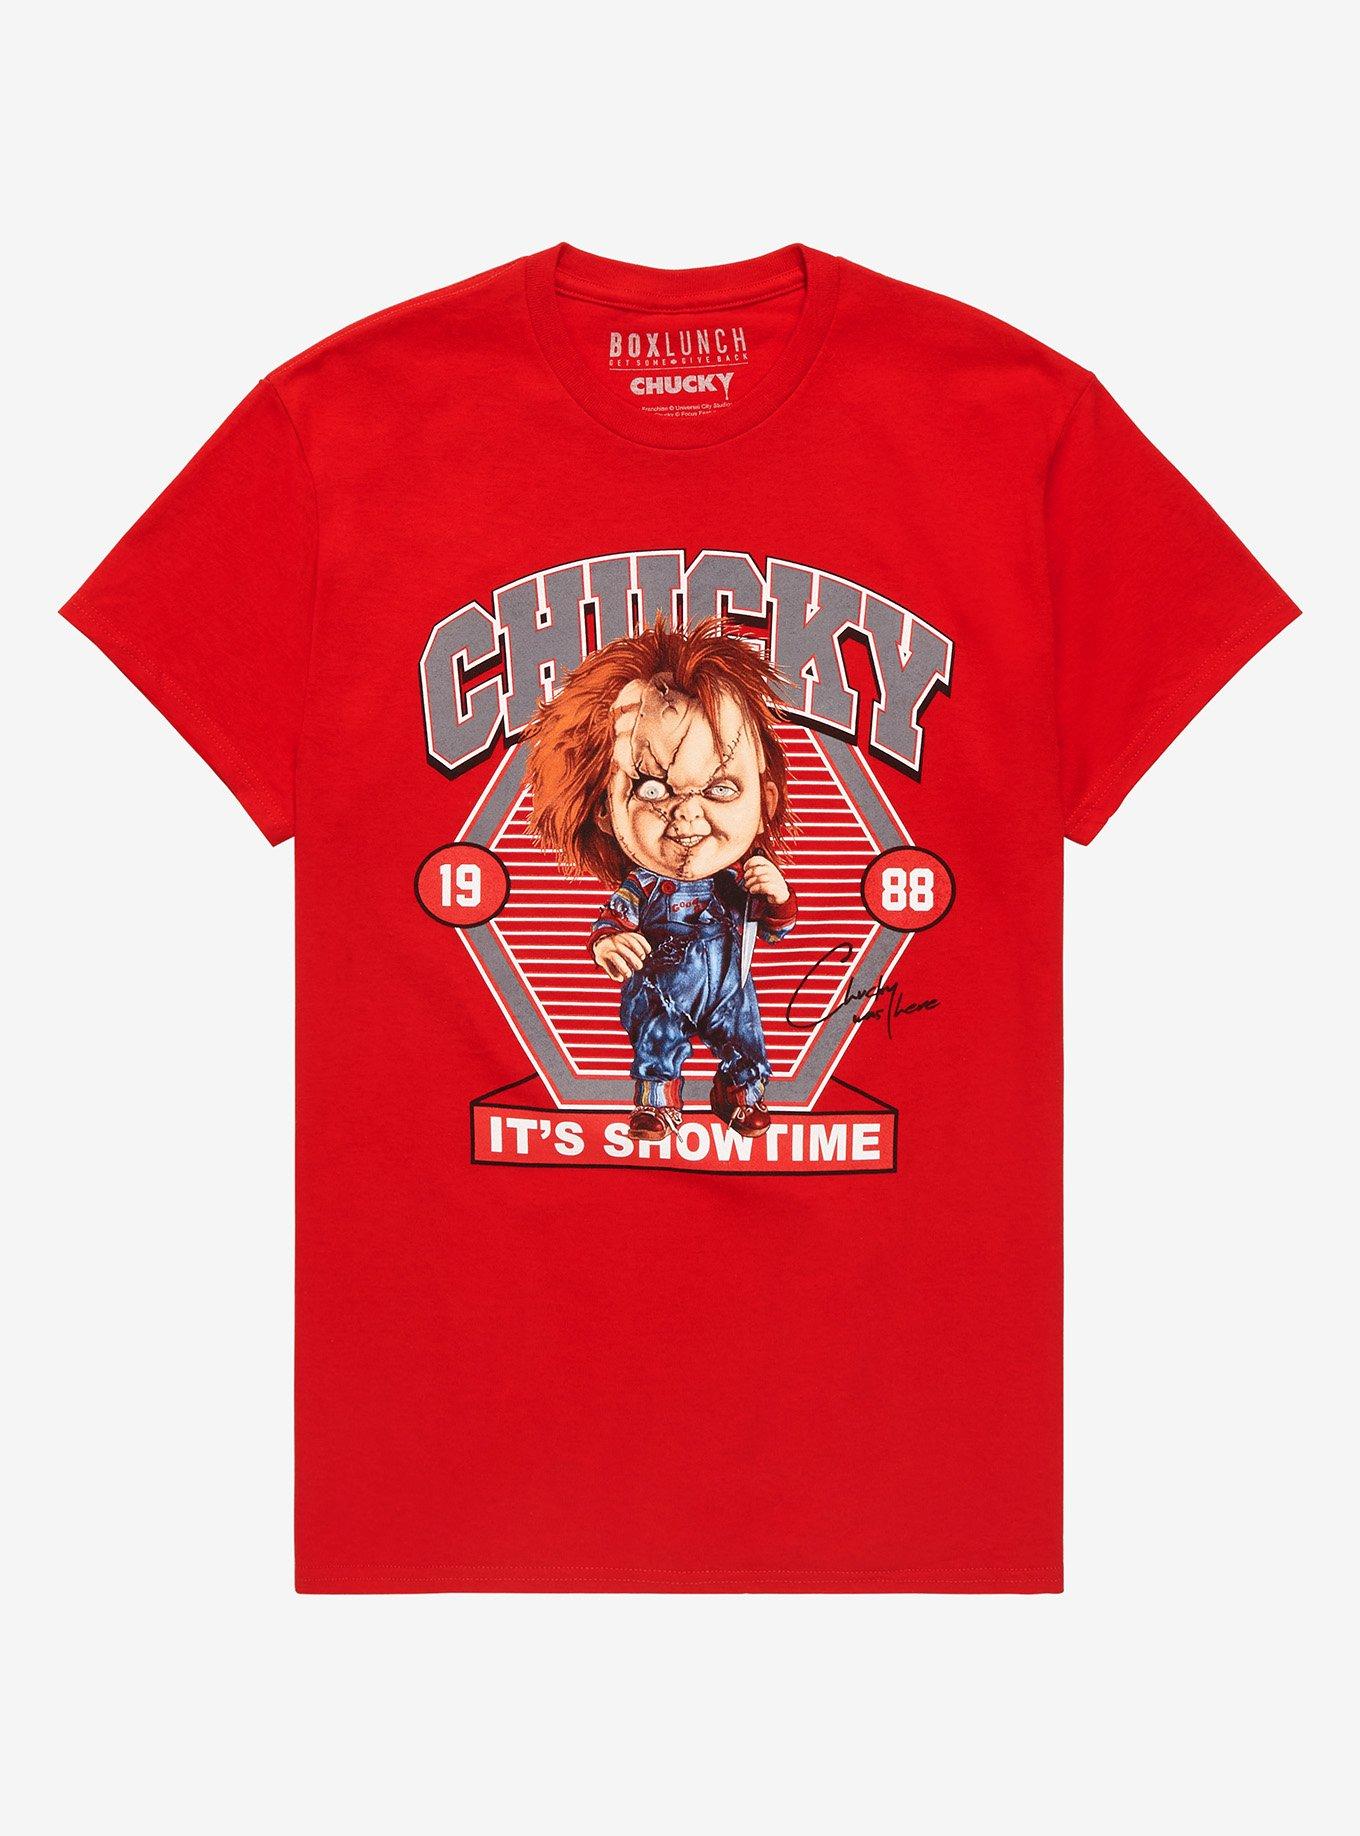 Child's Play Chucky Hockey Jersey - BoxLunch Exclusive